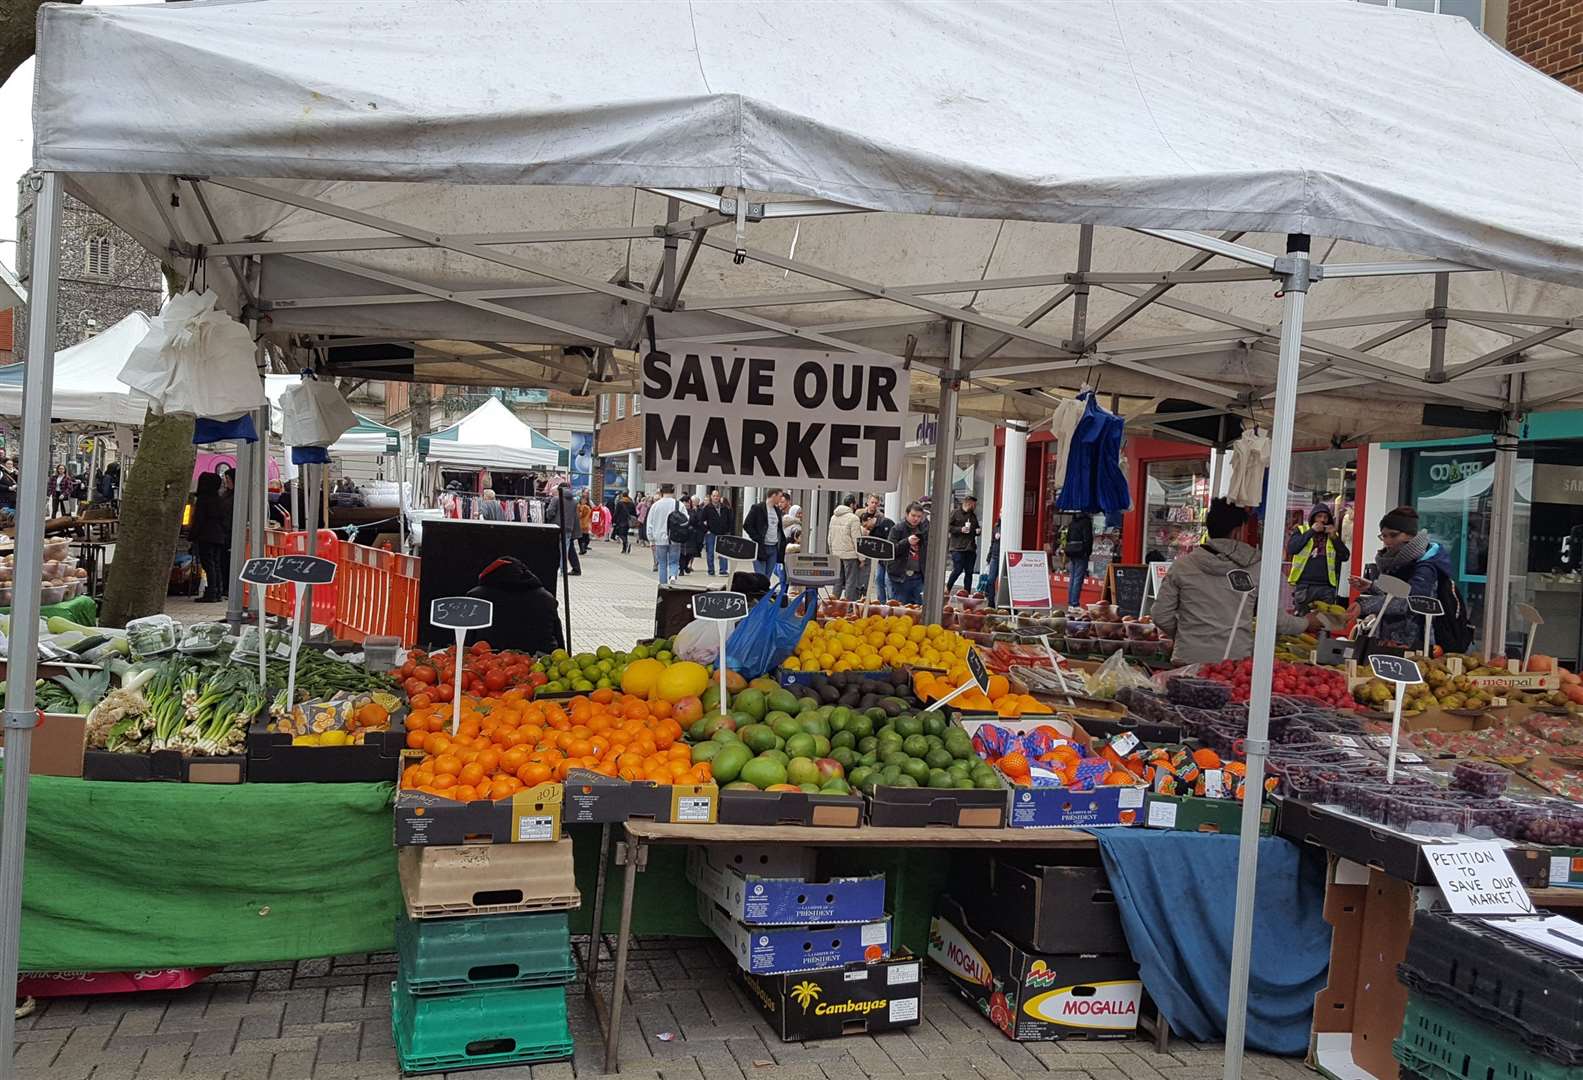 Supporters led a campaign to save Canterbury Market, which could soon return